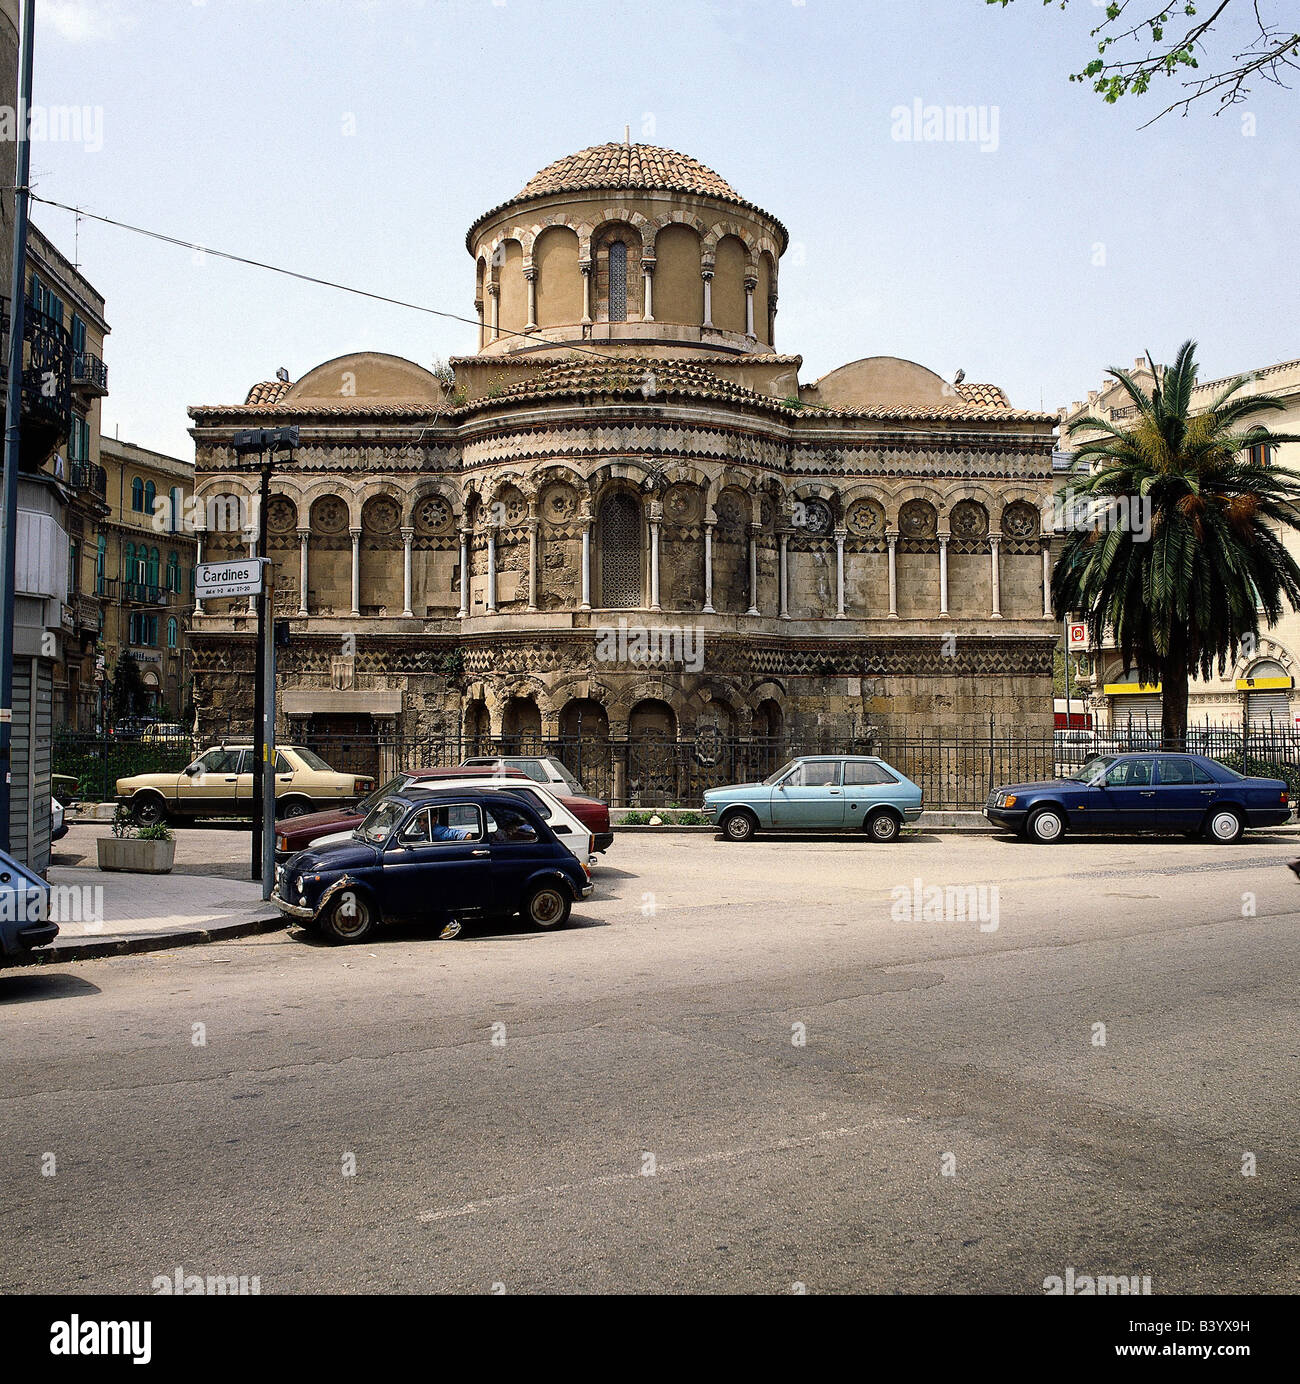 geography / travel, Italy, Sicily, Messina, church Annunziata dei Catalani, built 2nd half of 12th century, under King Wilhelm II. of Sicily, facade, Arabian/Norman architecture, Normans, Middle Ages, historical, historic, ancient, round arch, columns, dome, Romanesque, medieval, Stock Photo